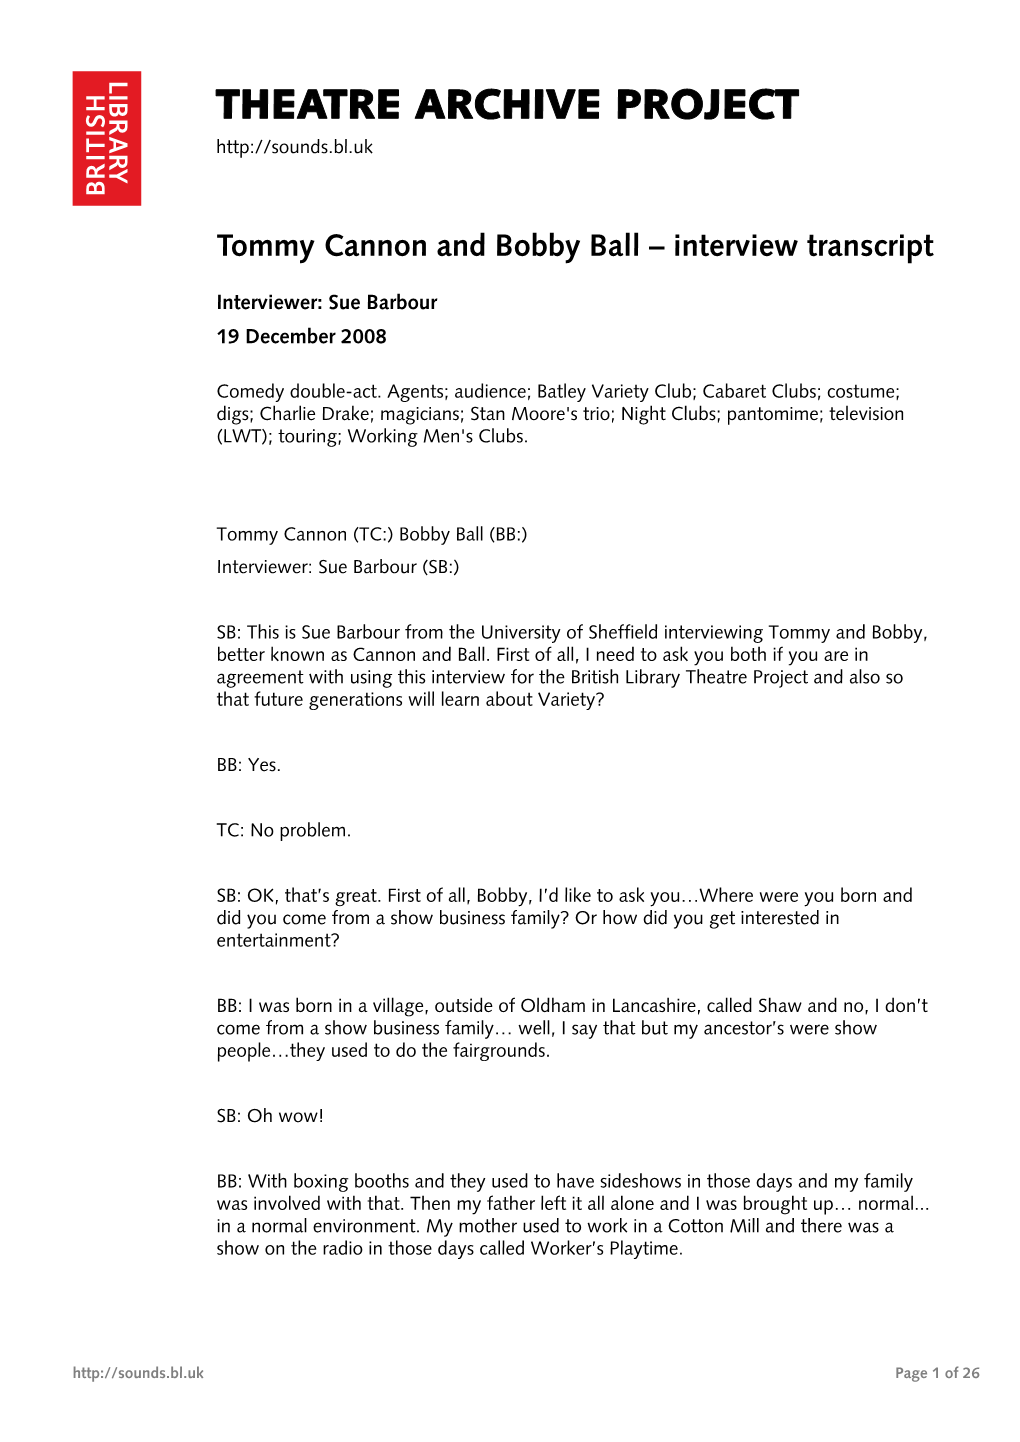 Interview with Tommy Cannon and Bobby Ball